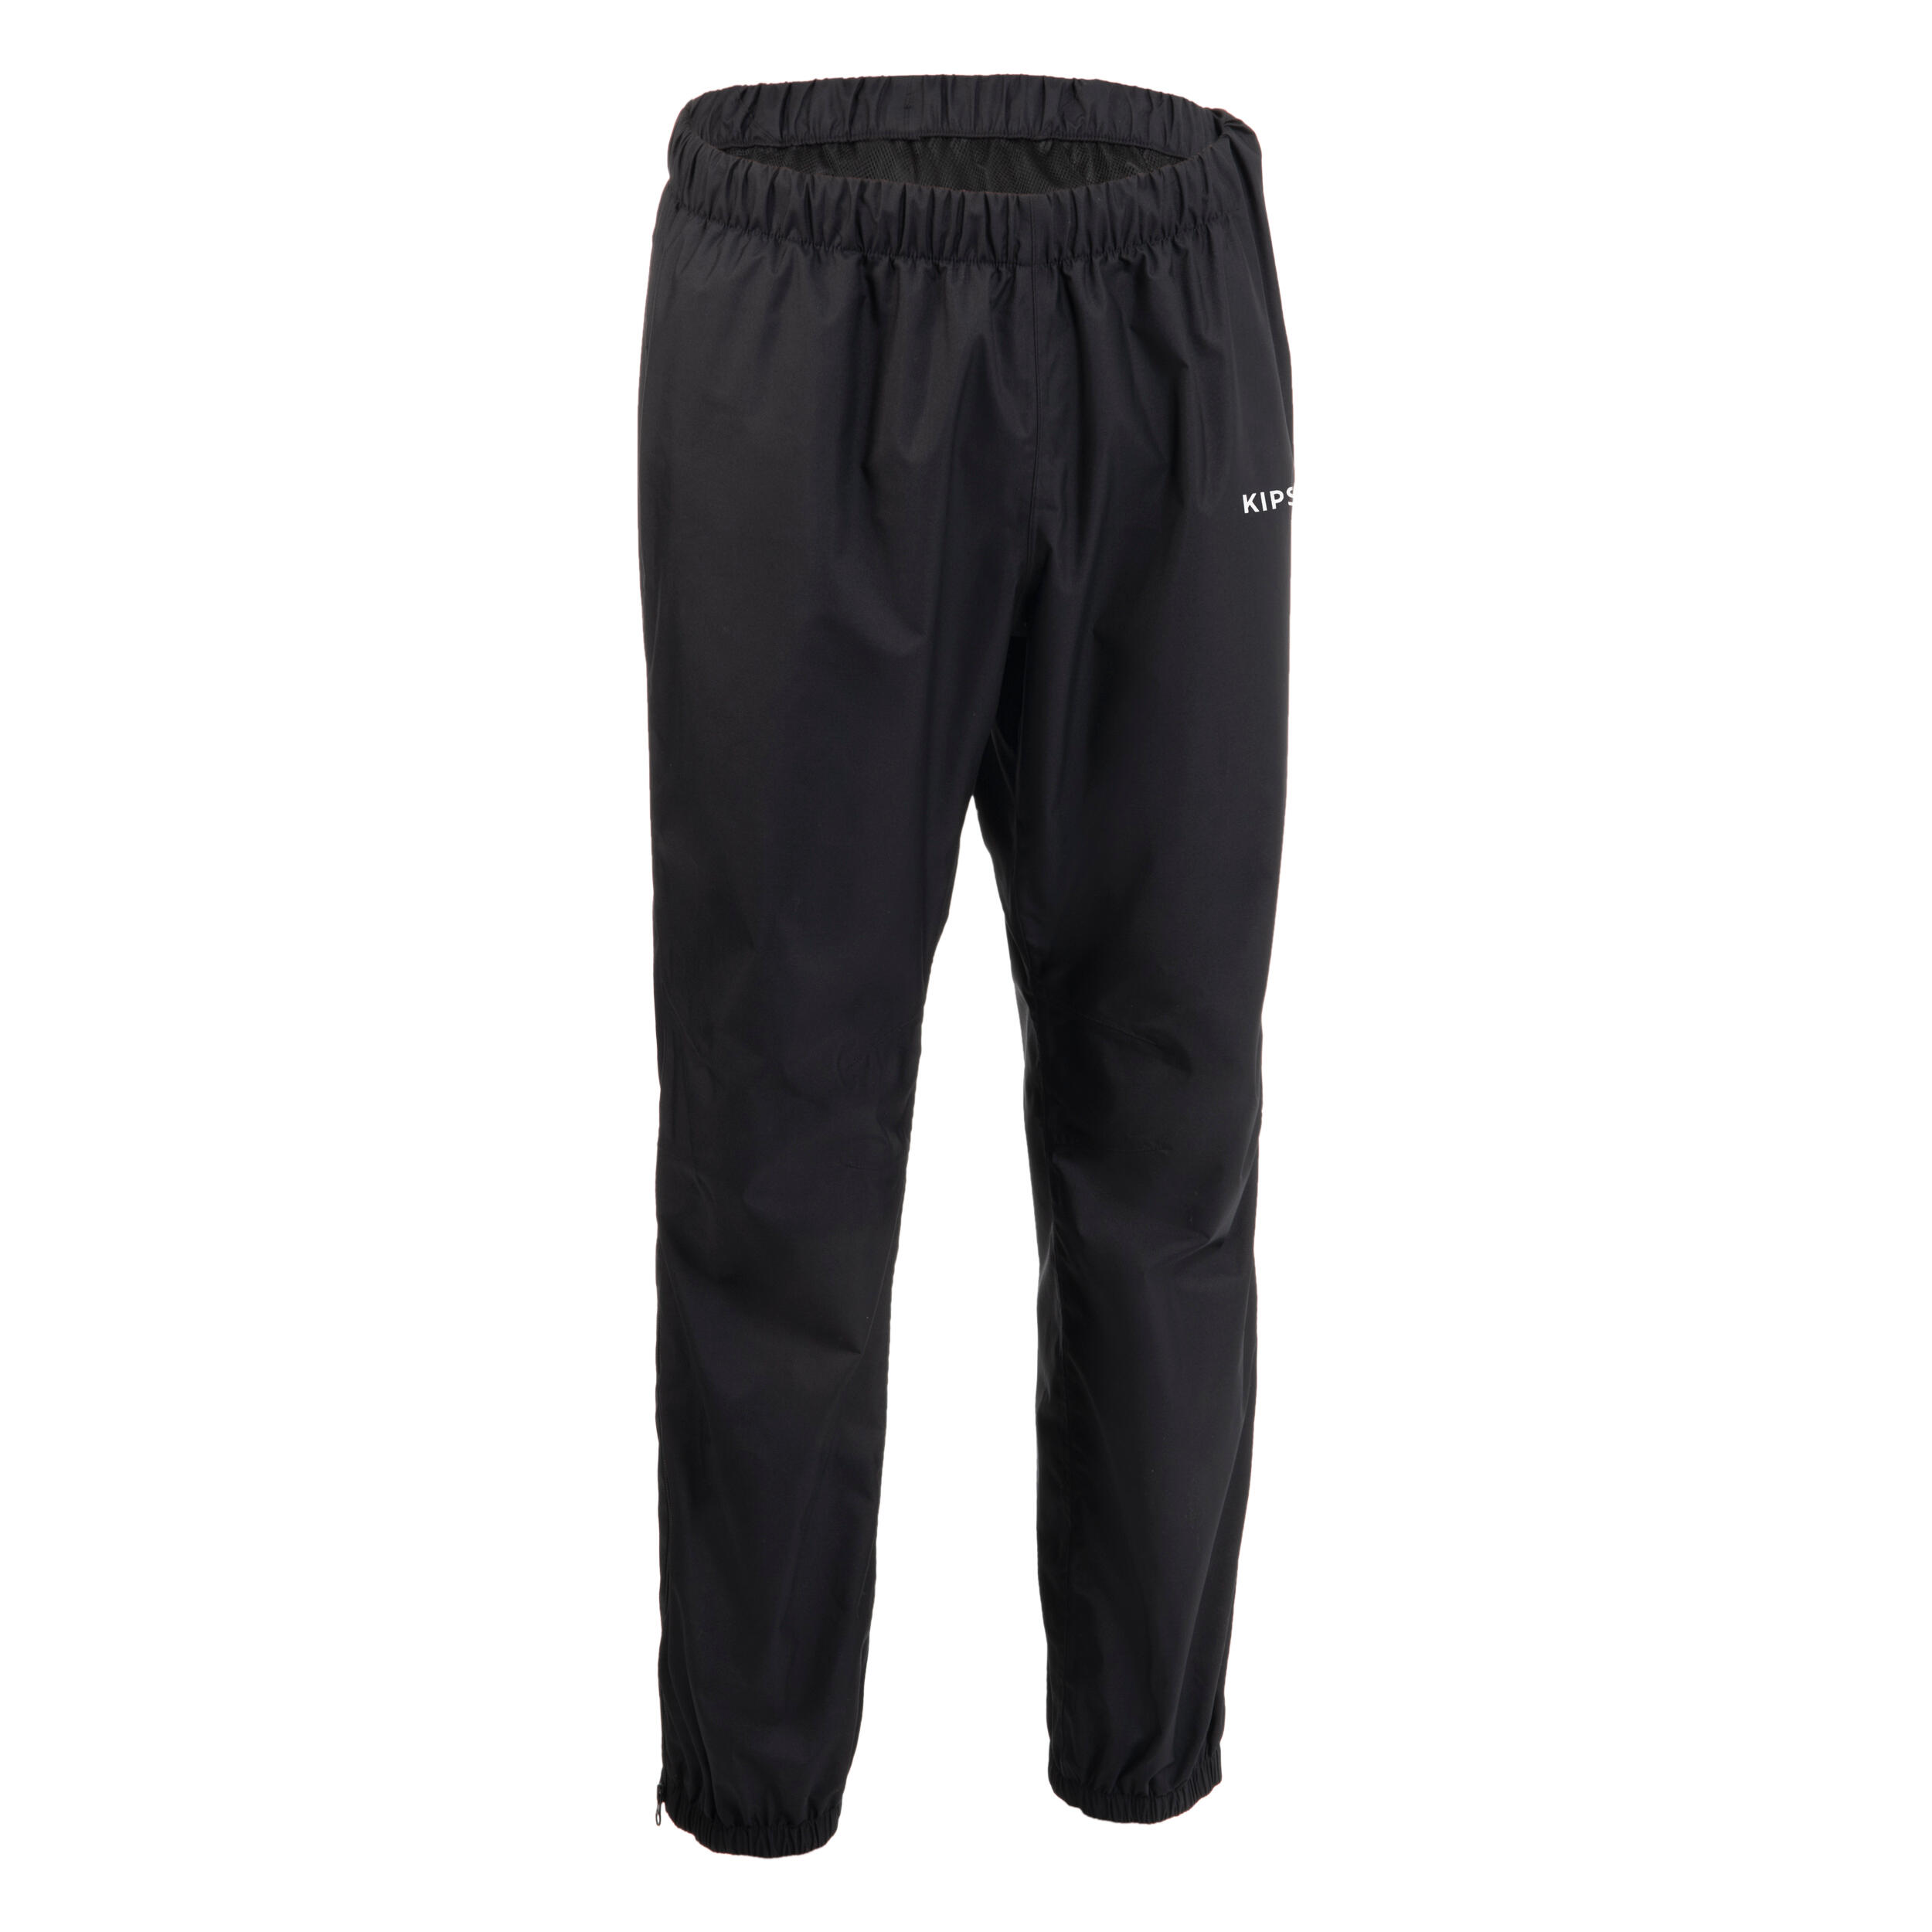 WOMEN'S QUICK-DRY TROUSERS